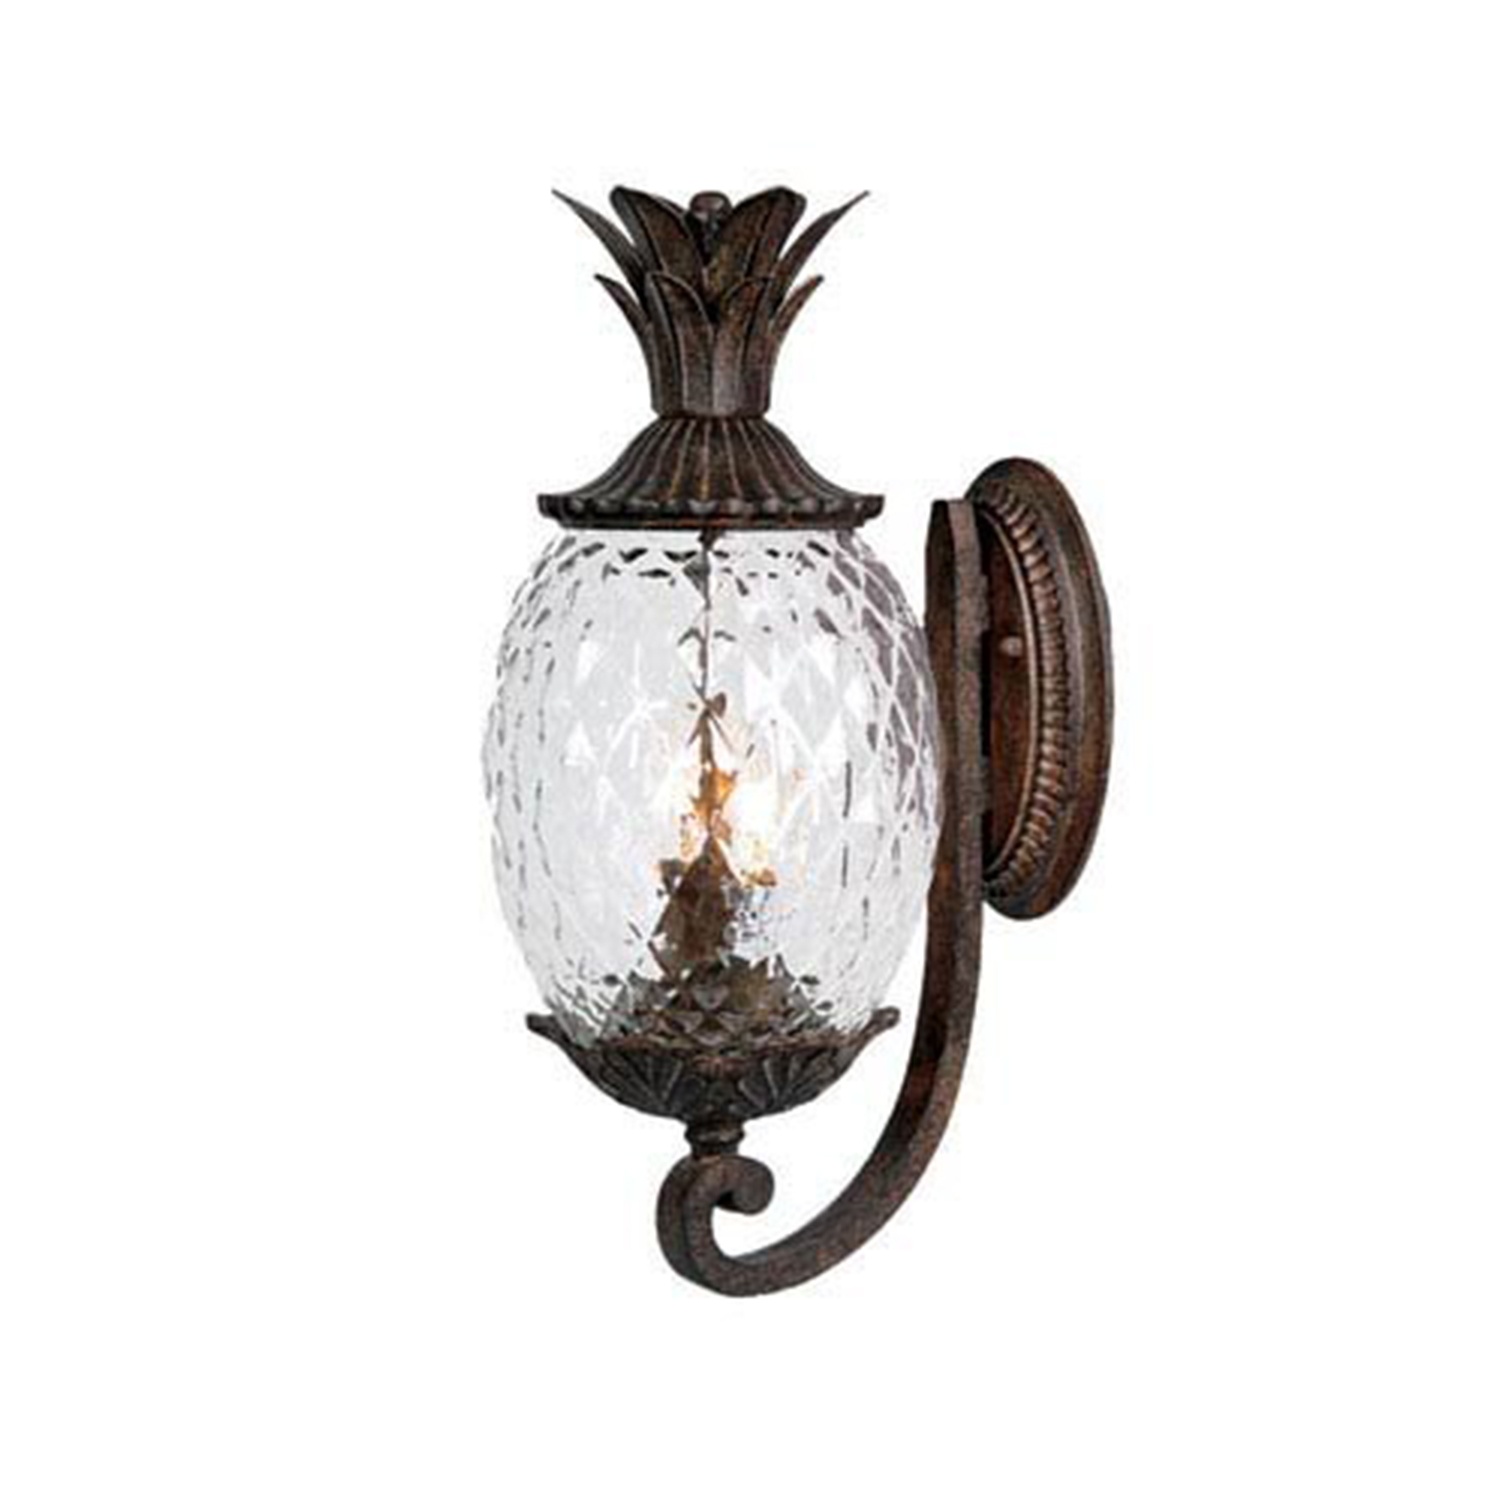  Acclaim 7501BC Lanai Collection 2-Light Wall Mount Outdoor Light Fixture, Black Coral